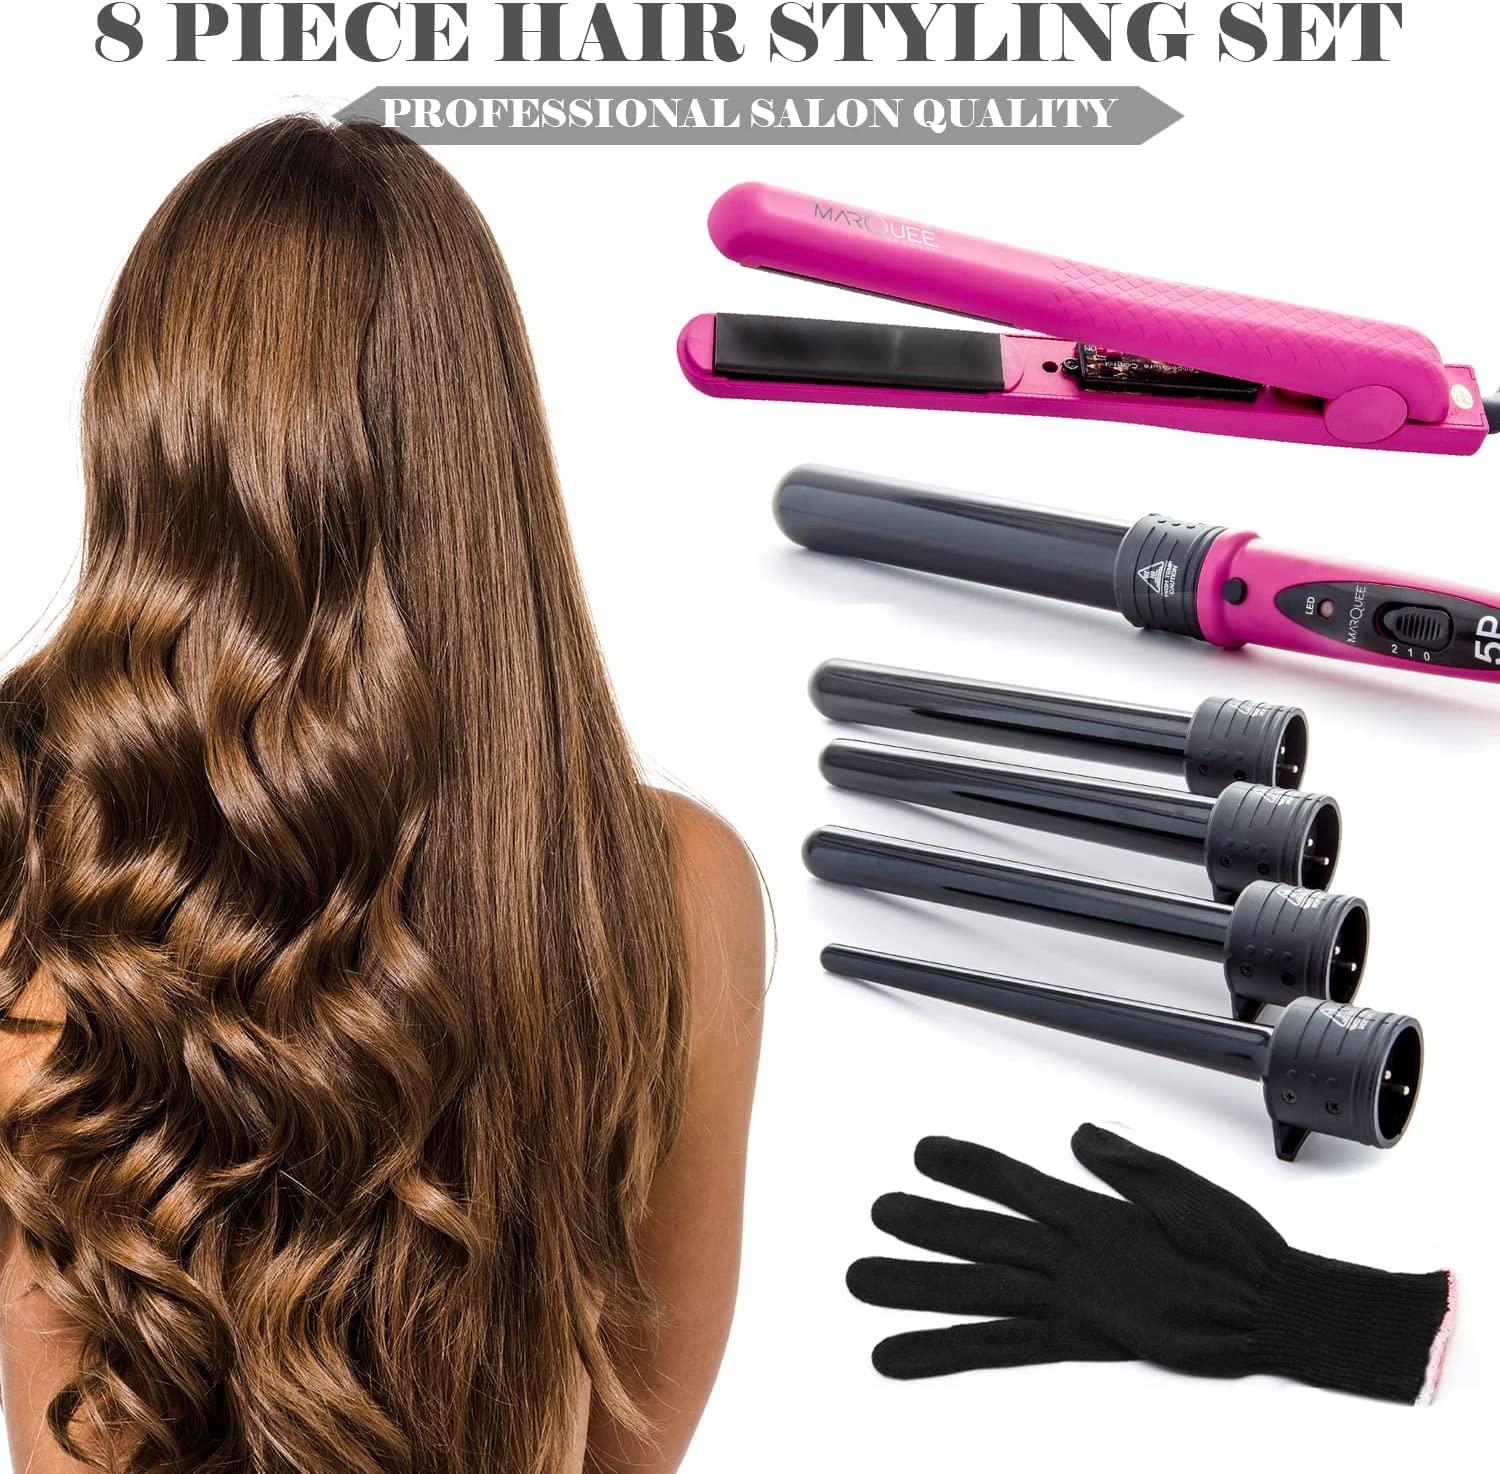 The Pink STR8 hair-styling tools styler flat iron – Golden Curl